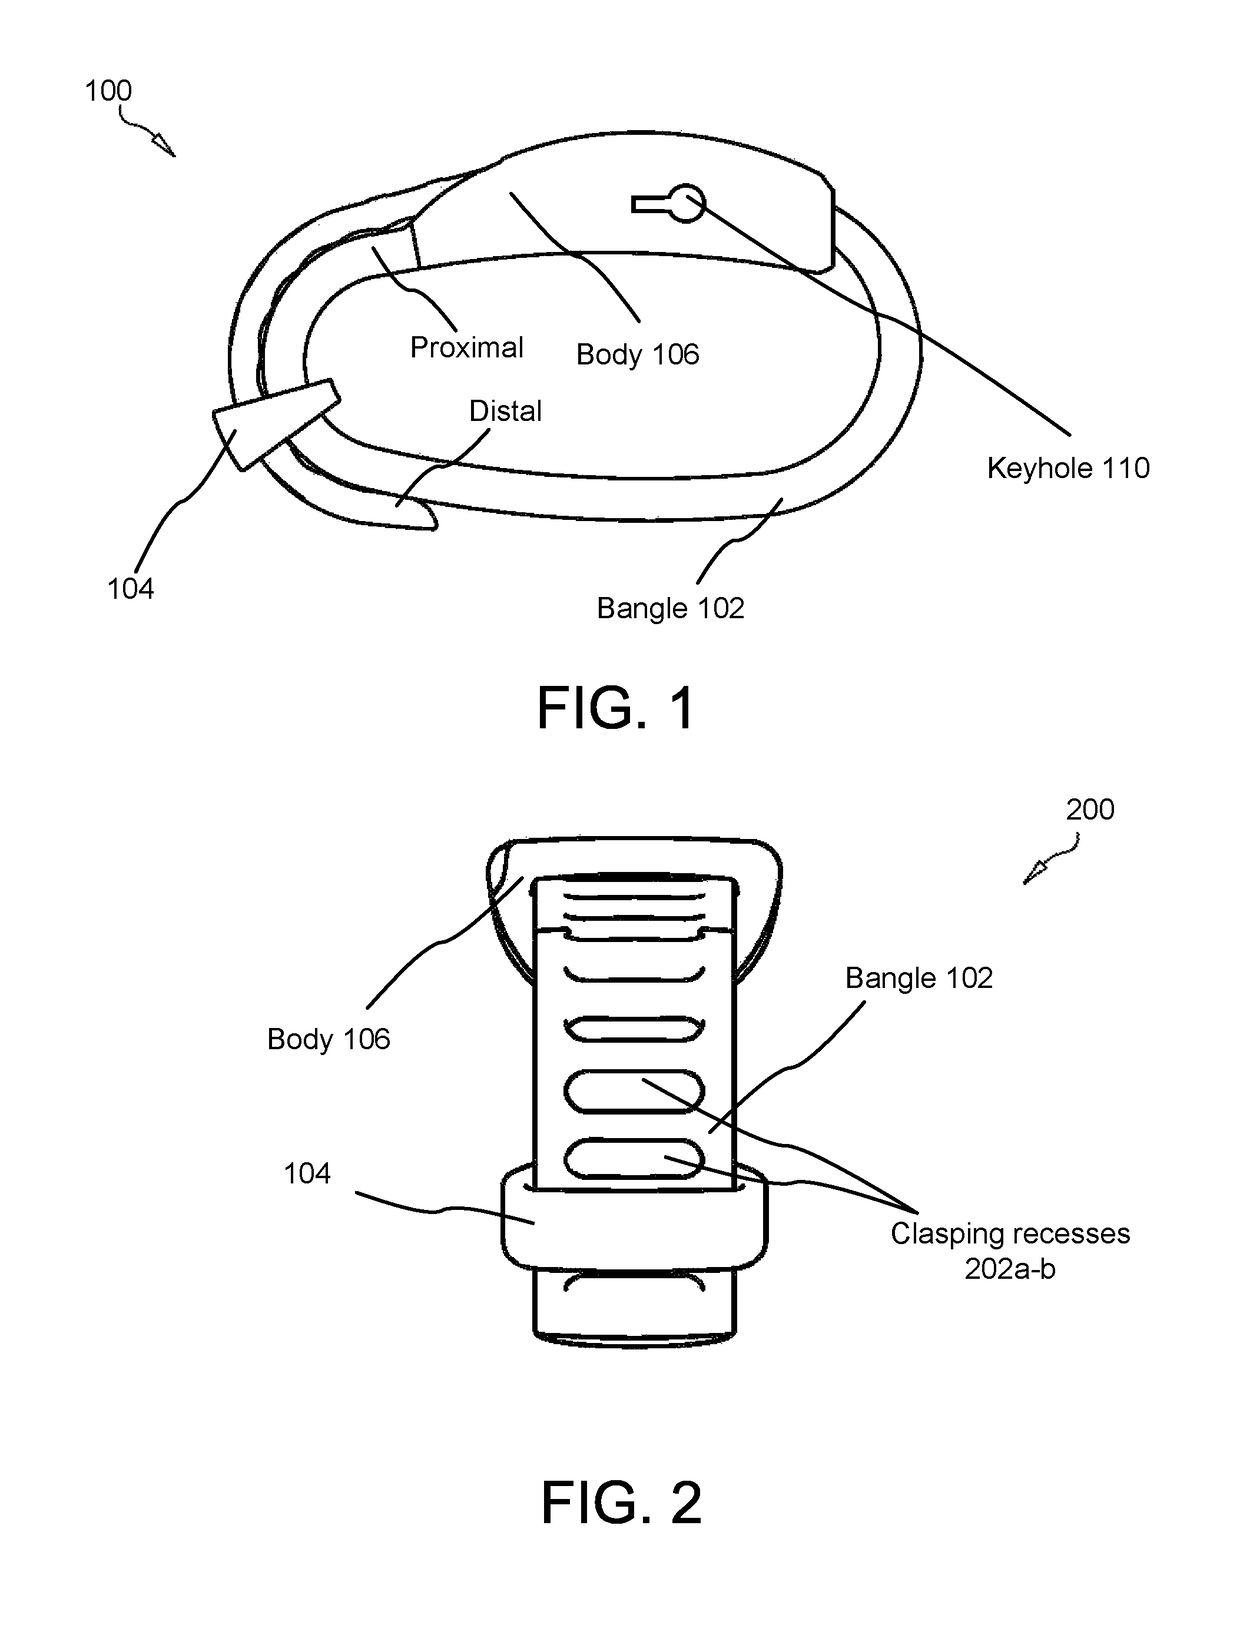 Programmable child positioning and tracking device